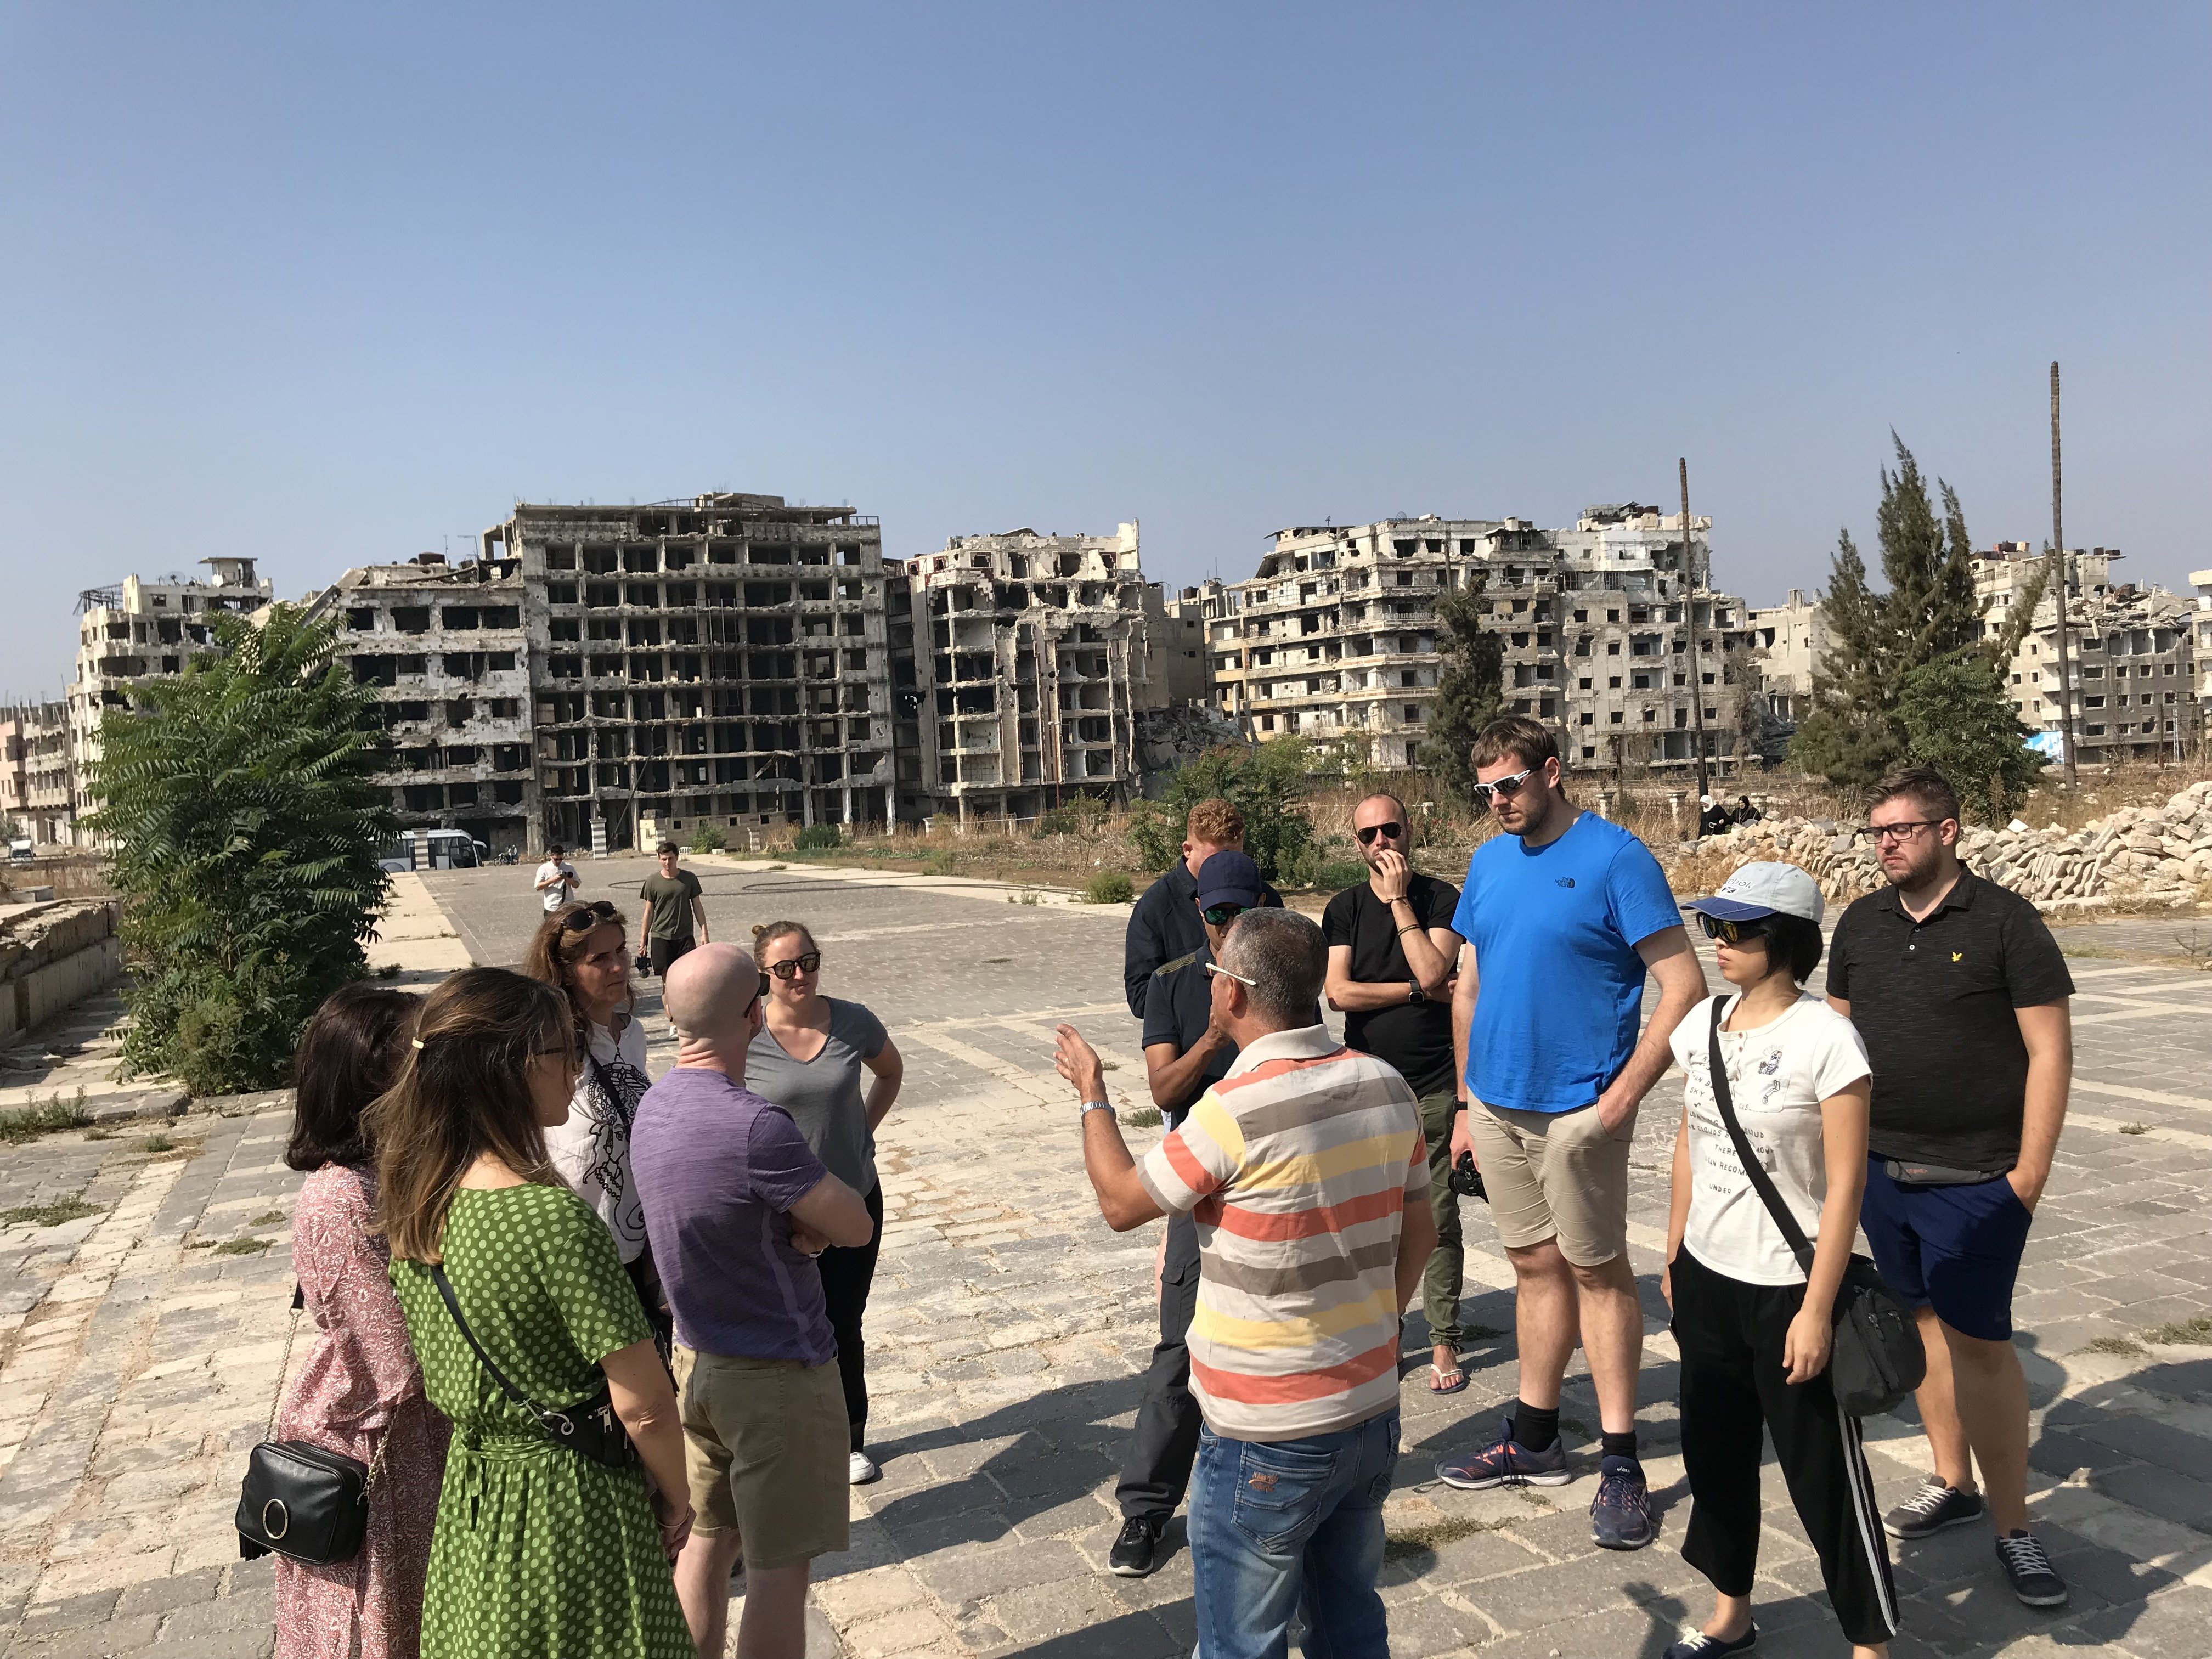 Our group tour in Syria, in Homs